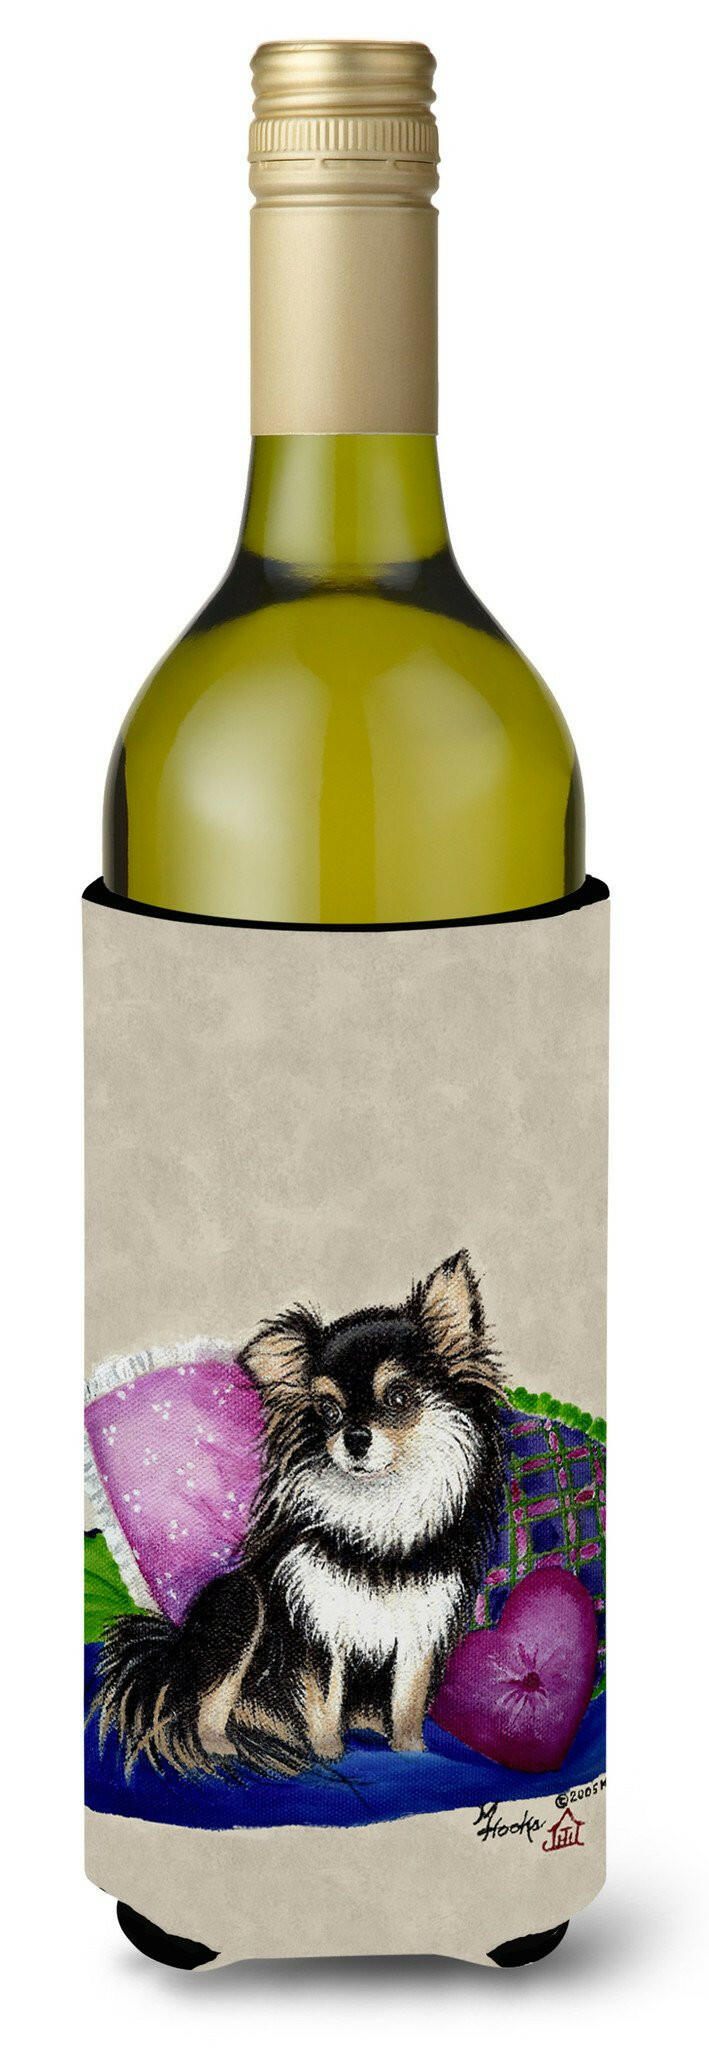 Chihuahua on their couch Wine Bottle Beverage Insulator Hugger MH1012LITERK by Caroline's Treasures